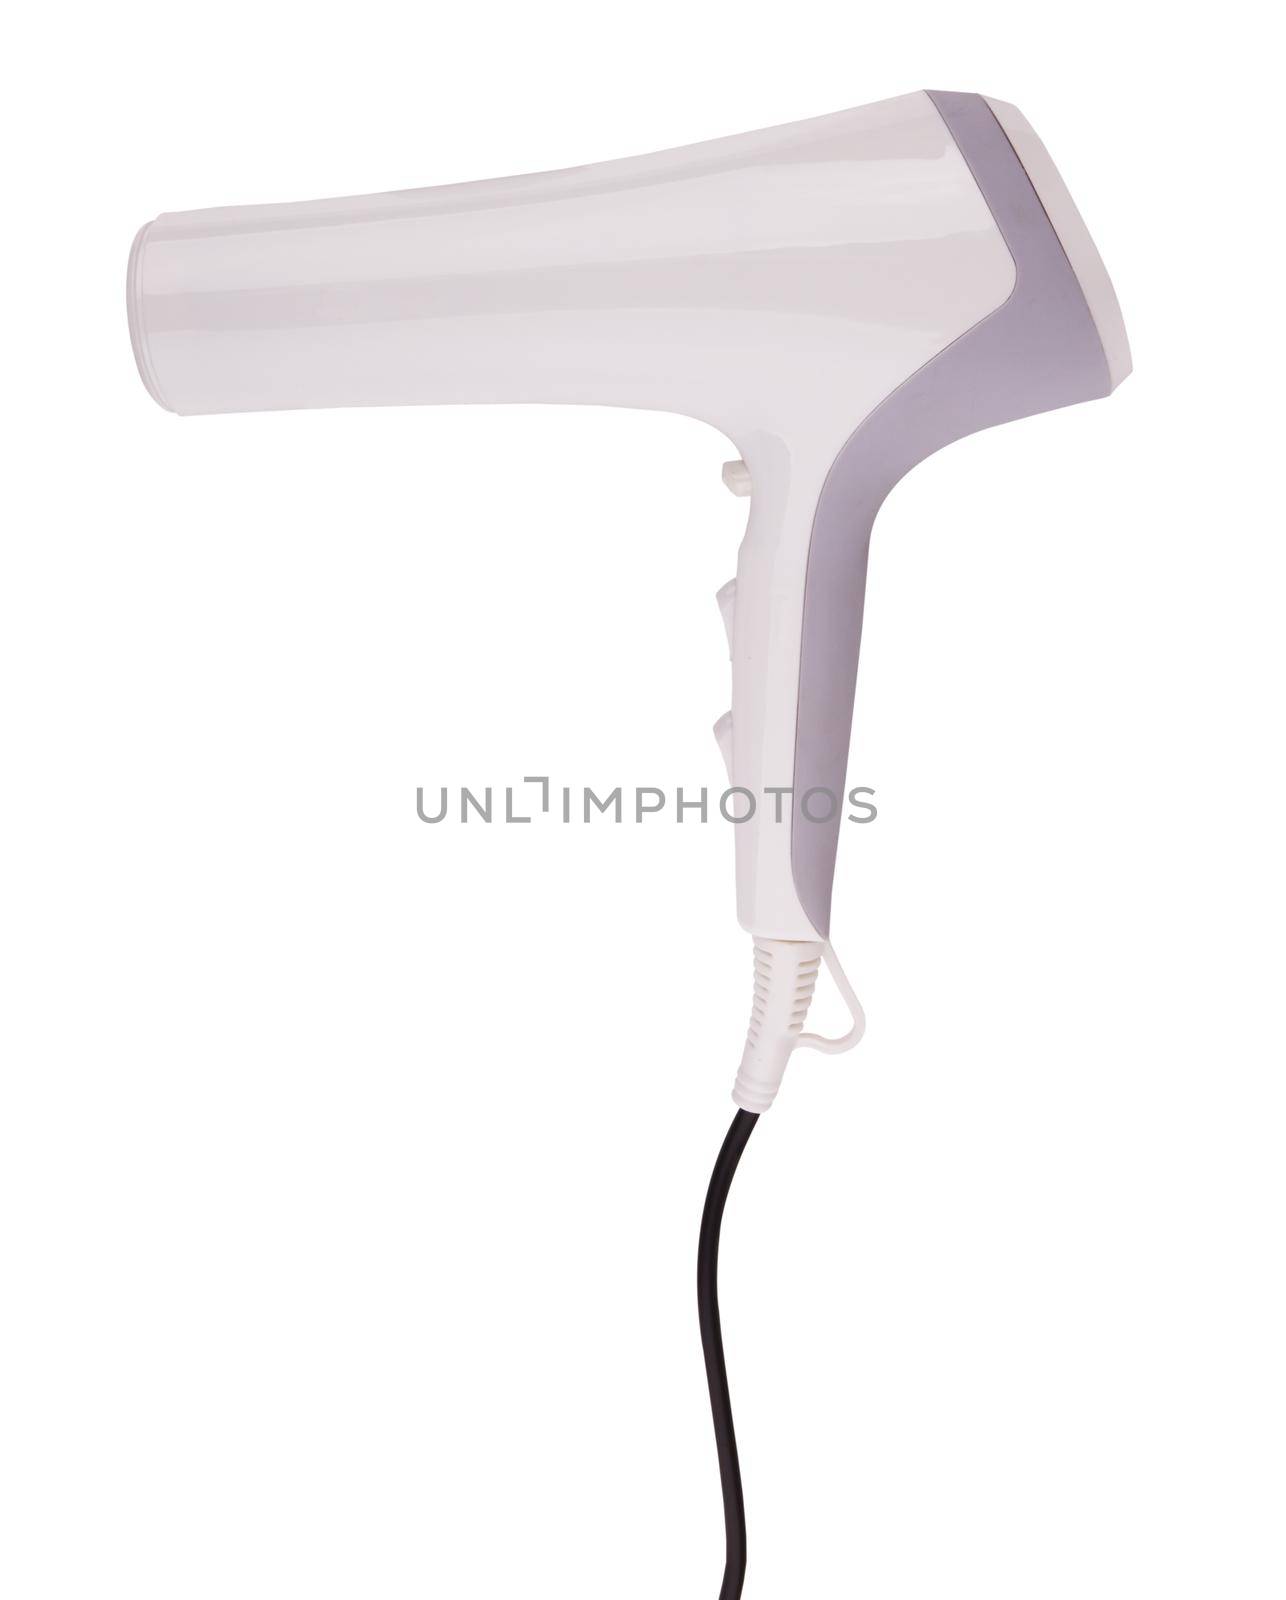 White hair dryer isolated on a white background